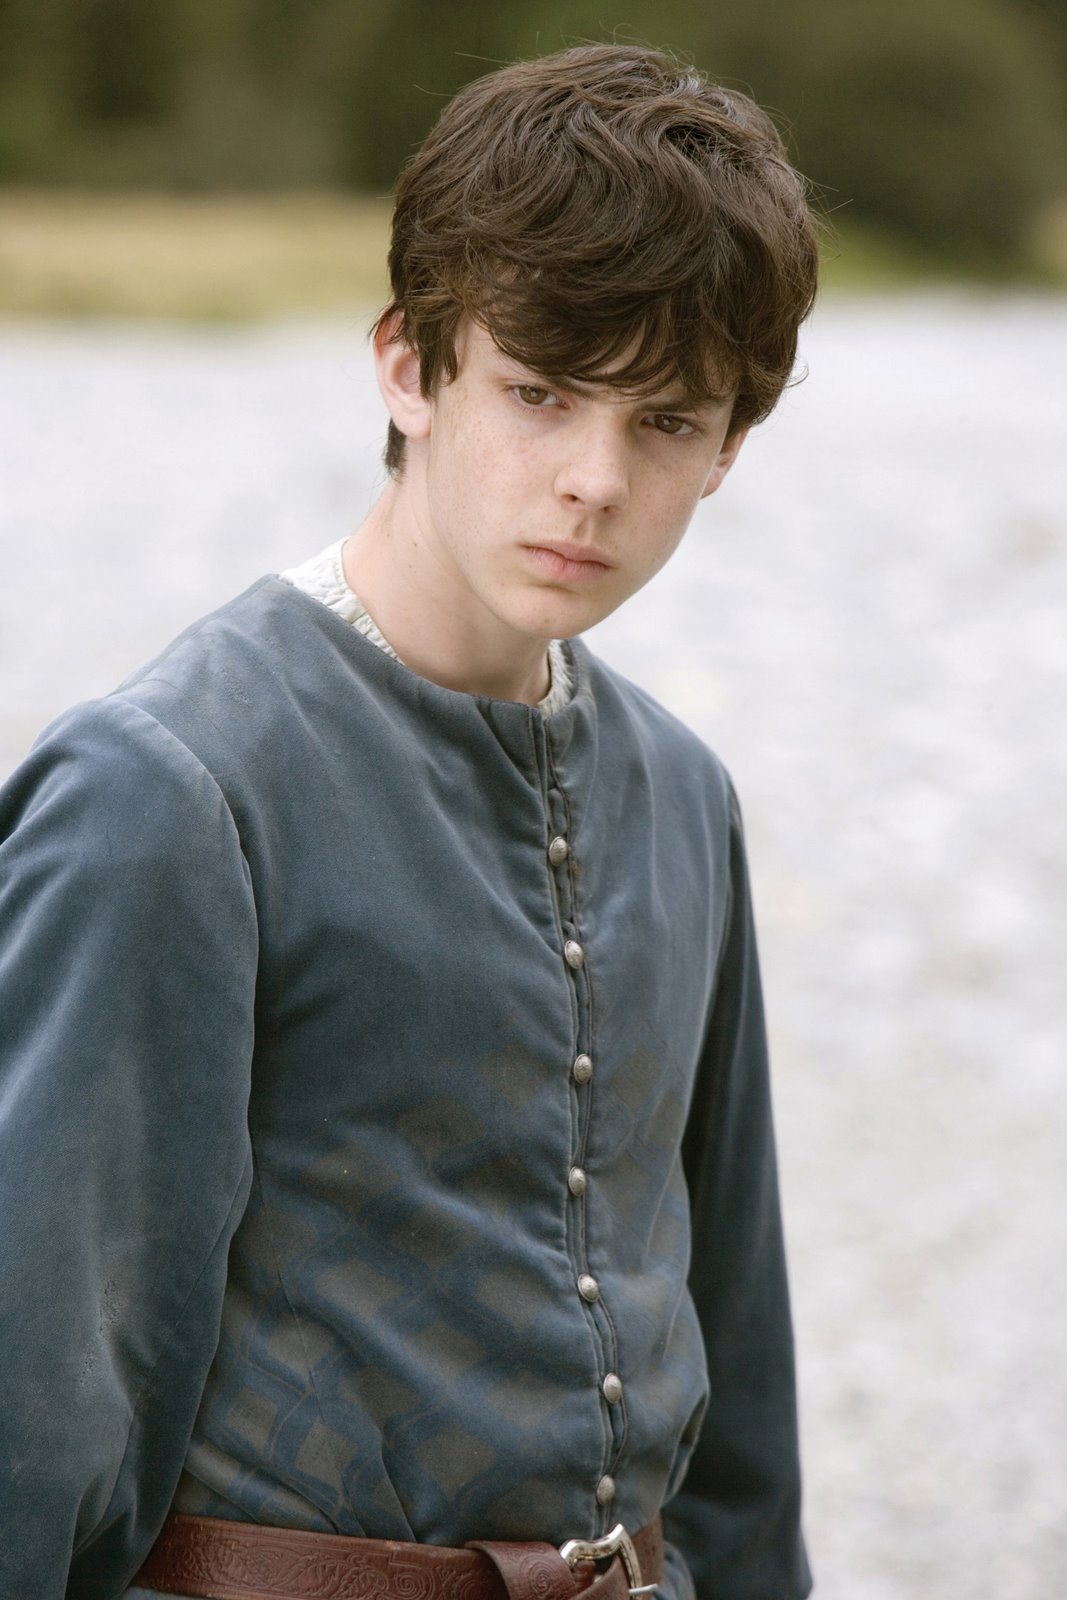 If Edmund from Narnia had gone to Hogwarts, which house would he